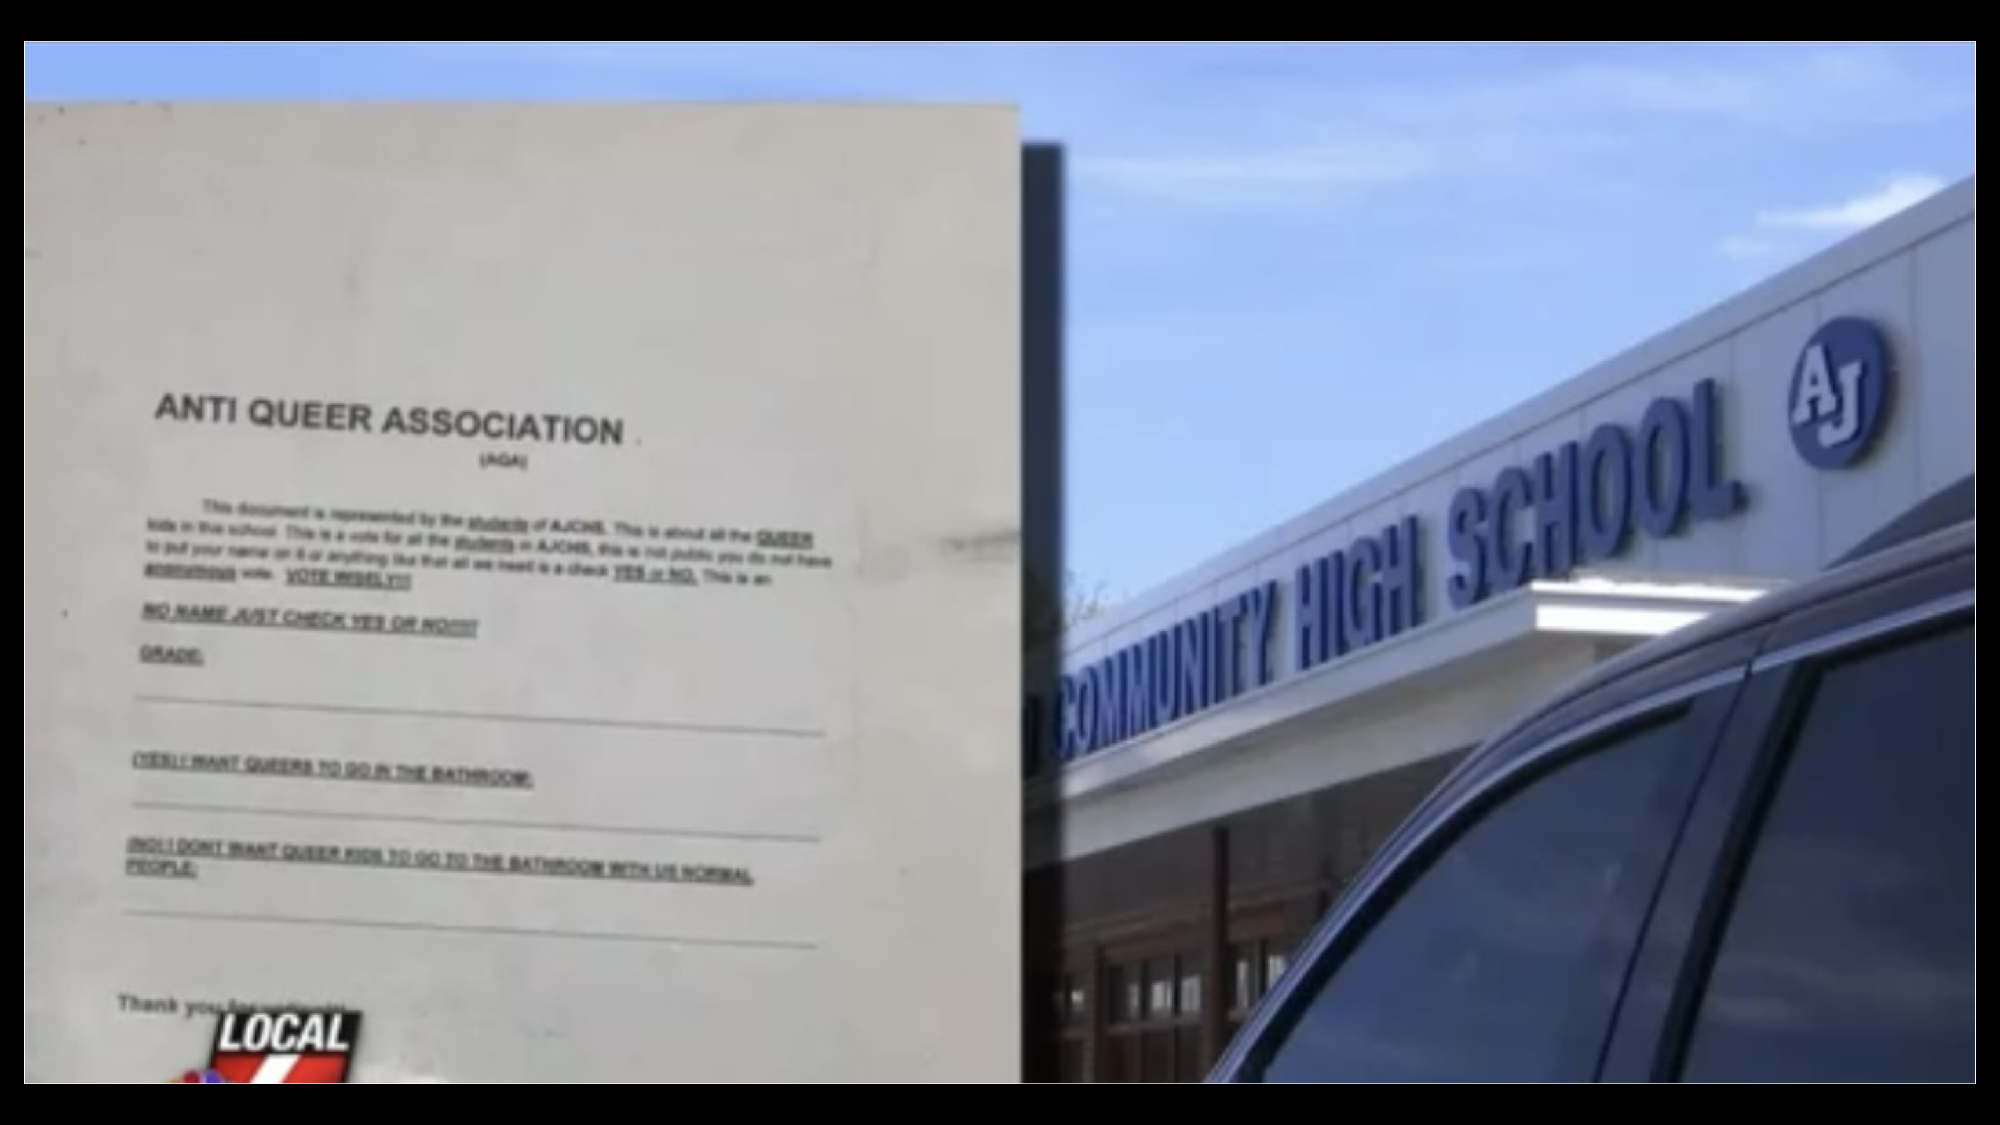 The "survey" asking if "queers" should use the bathroom with "normal people" was passed around Anna-Jonesboro Community High School.